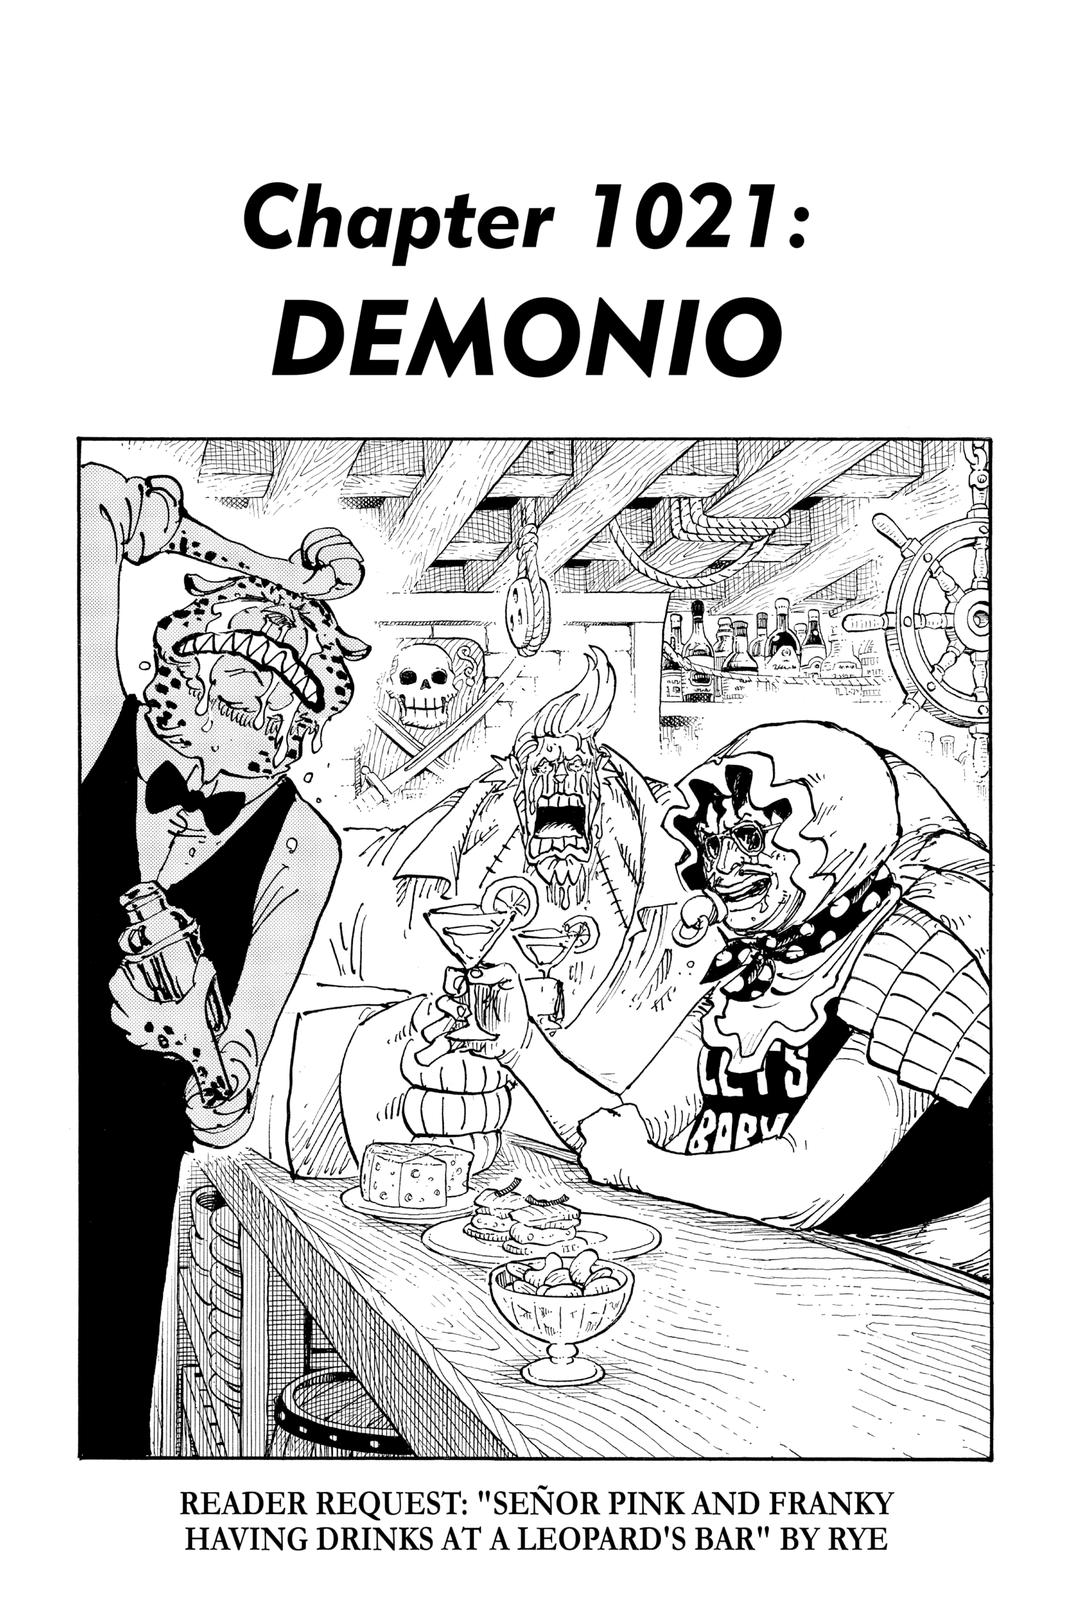 One Piece Chapter 1020 is on break, more focus on Kaido vs Yamato, Zoro  backs in action